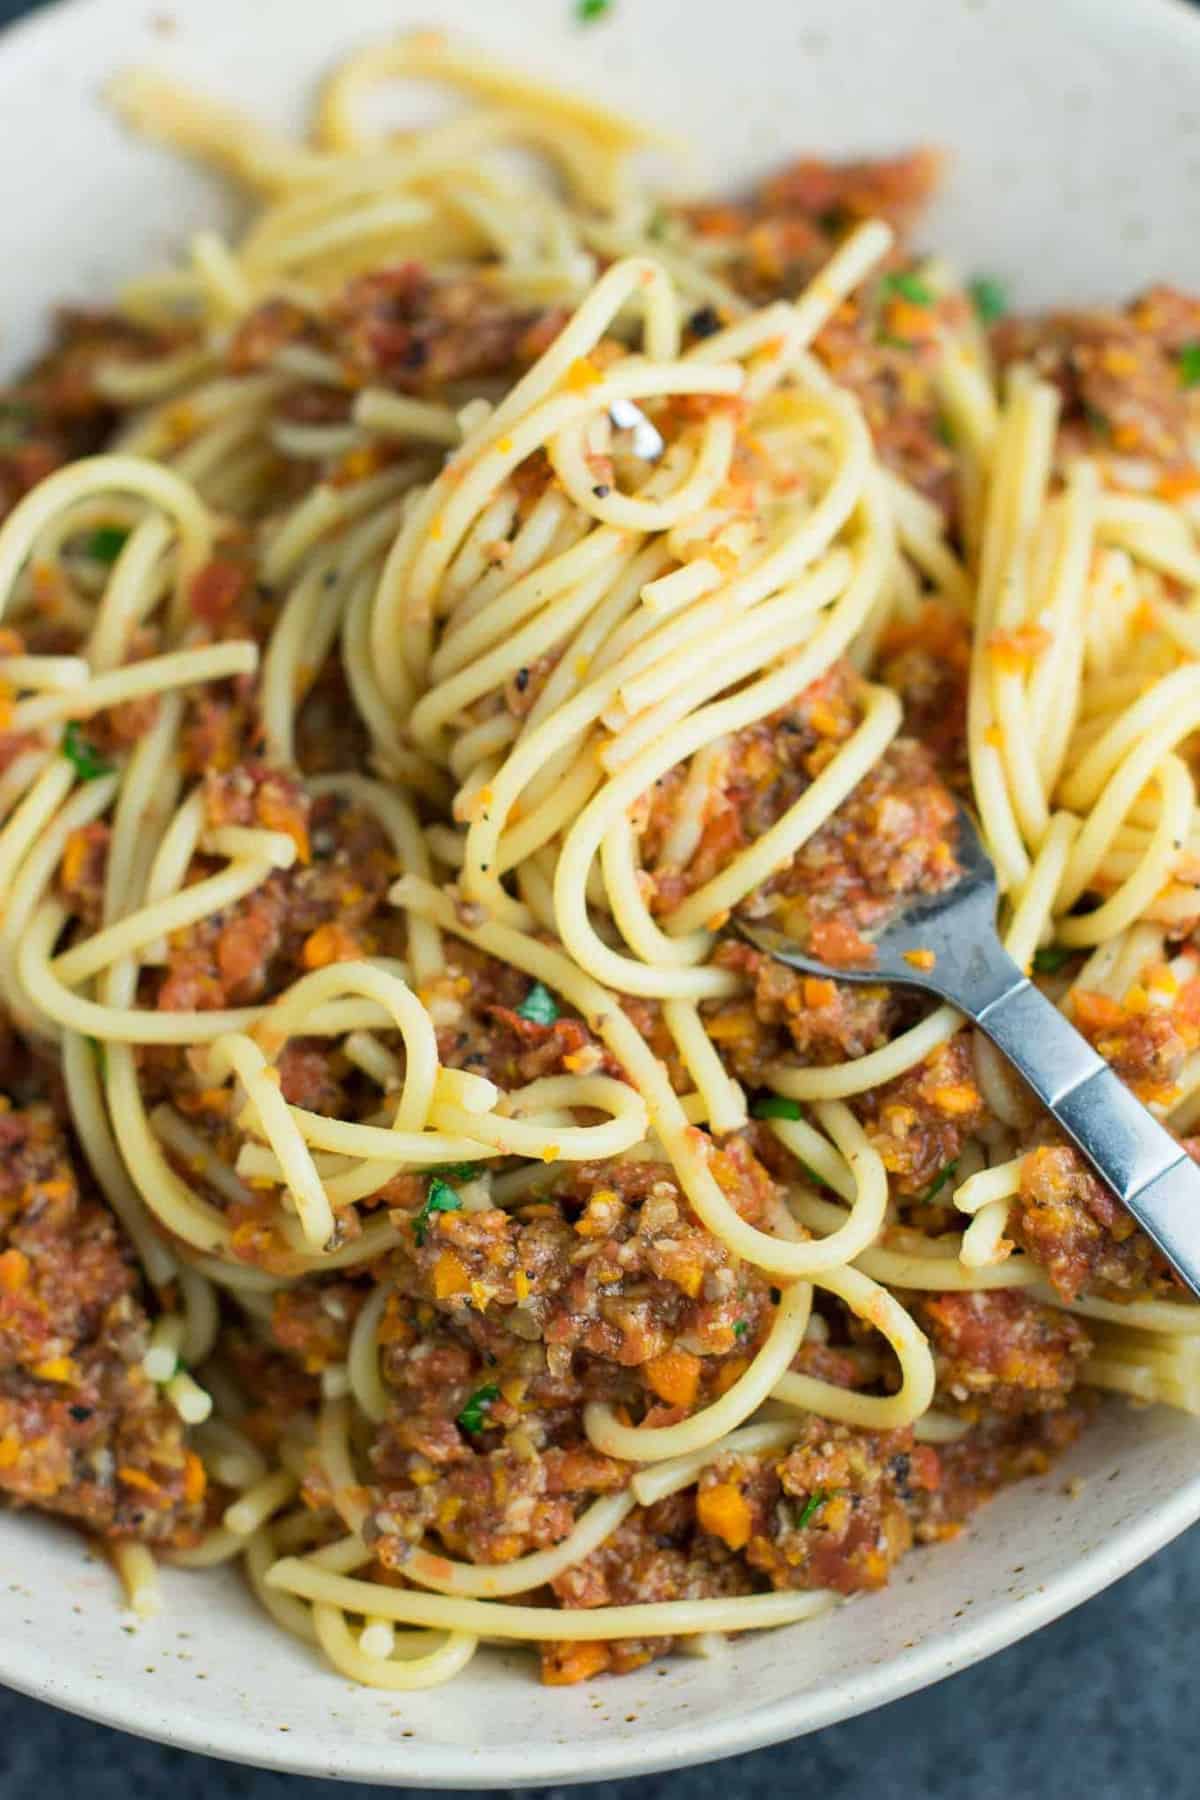 best vegan recipes - Vegetable bolognese recipe made with mushrooms, carrots, celery, garlic, and onion. A delicious meatless vegetarian "meat" sauce recipe. #vegetablebolognese #vegan #vegetarian #bologneserecipe